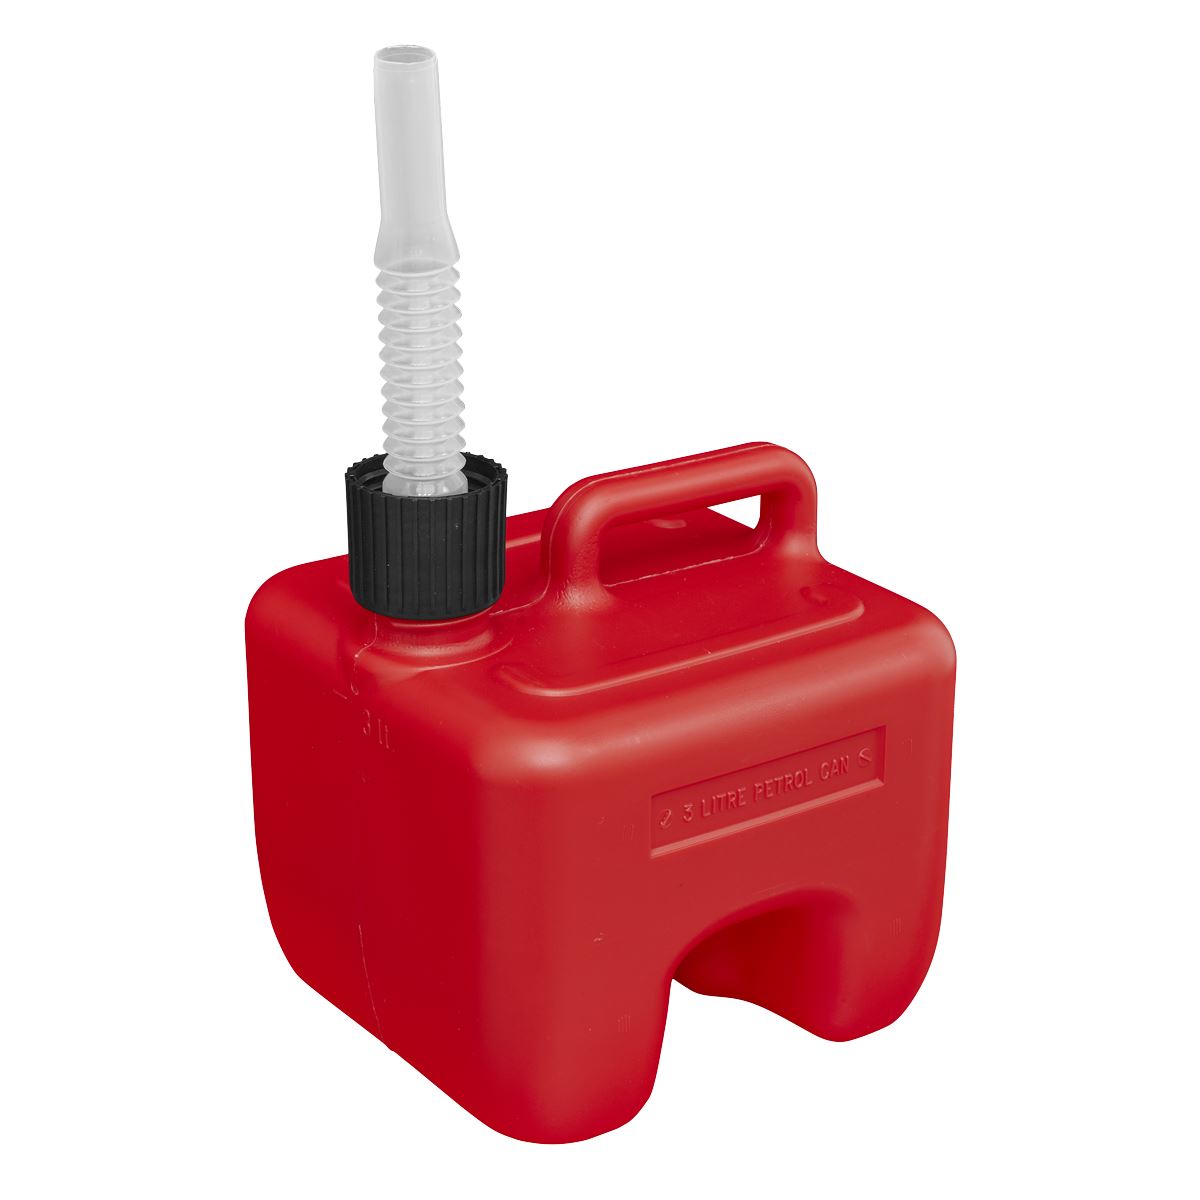 Sealey Stackable Fuel Can 3L - Red